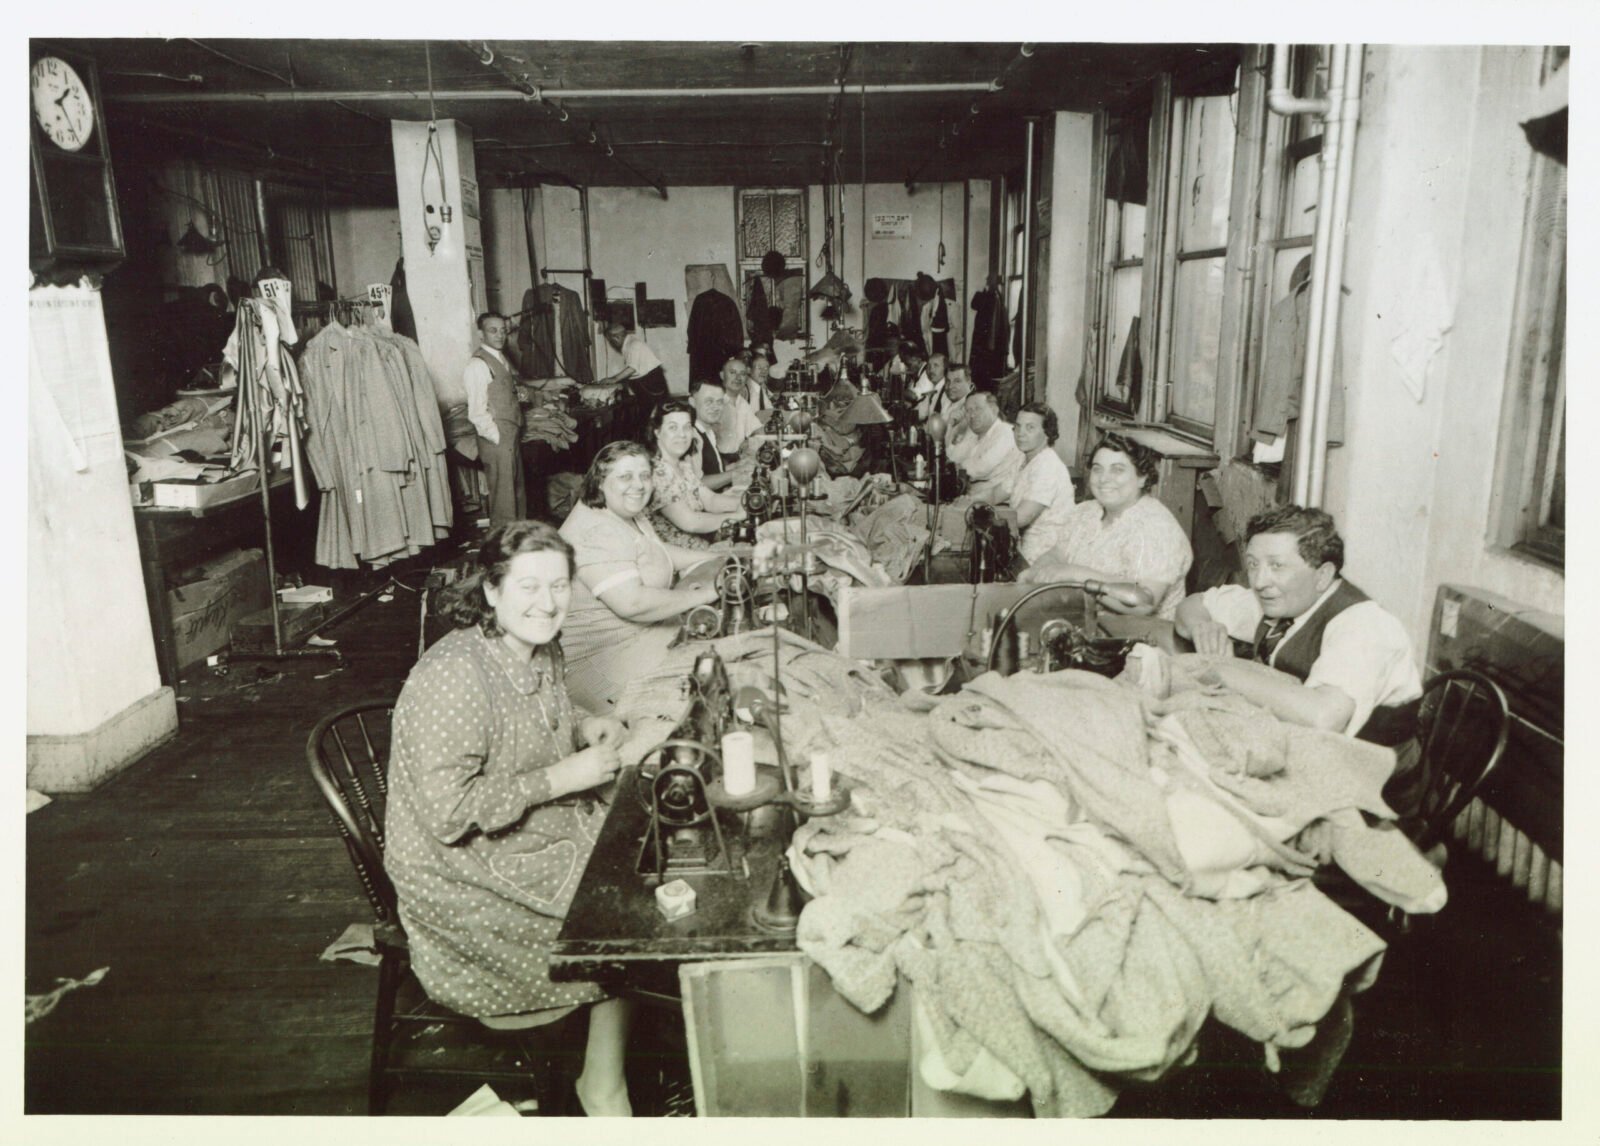 Black and white photograph, 13 people with light skin seated at a long table with sewing machines, garments. Rosaria has dark hair and is smiling.